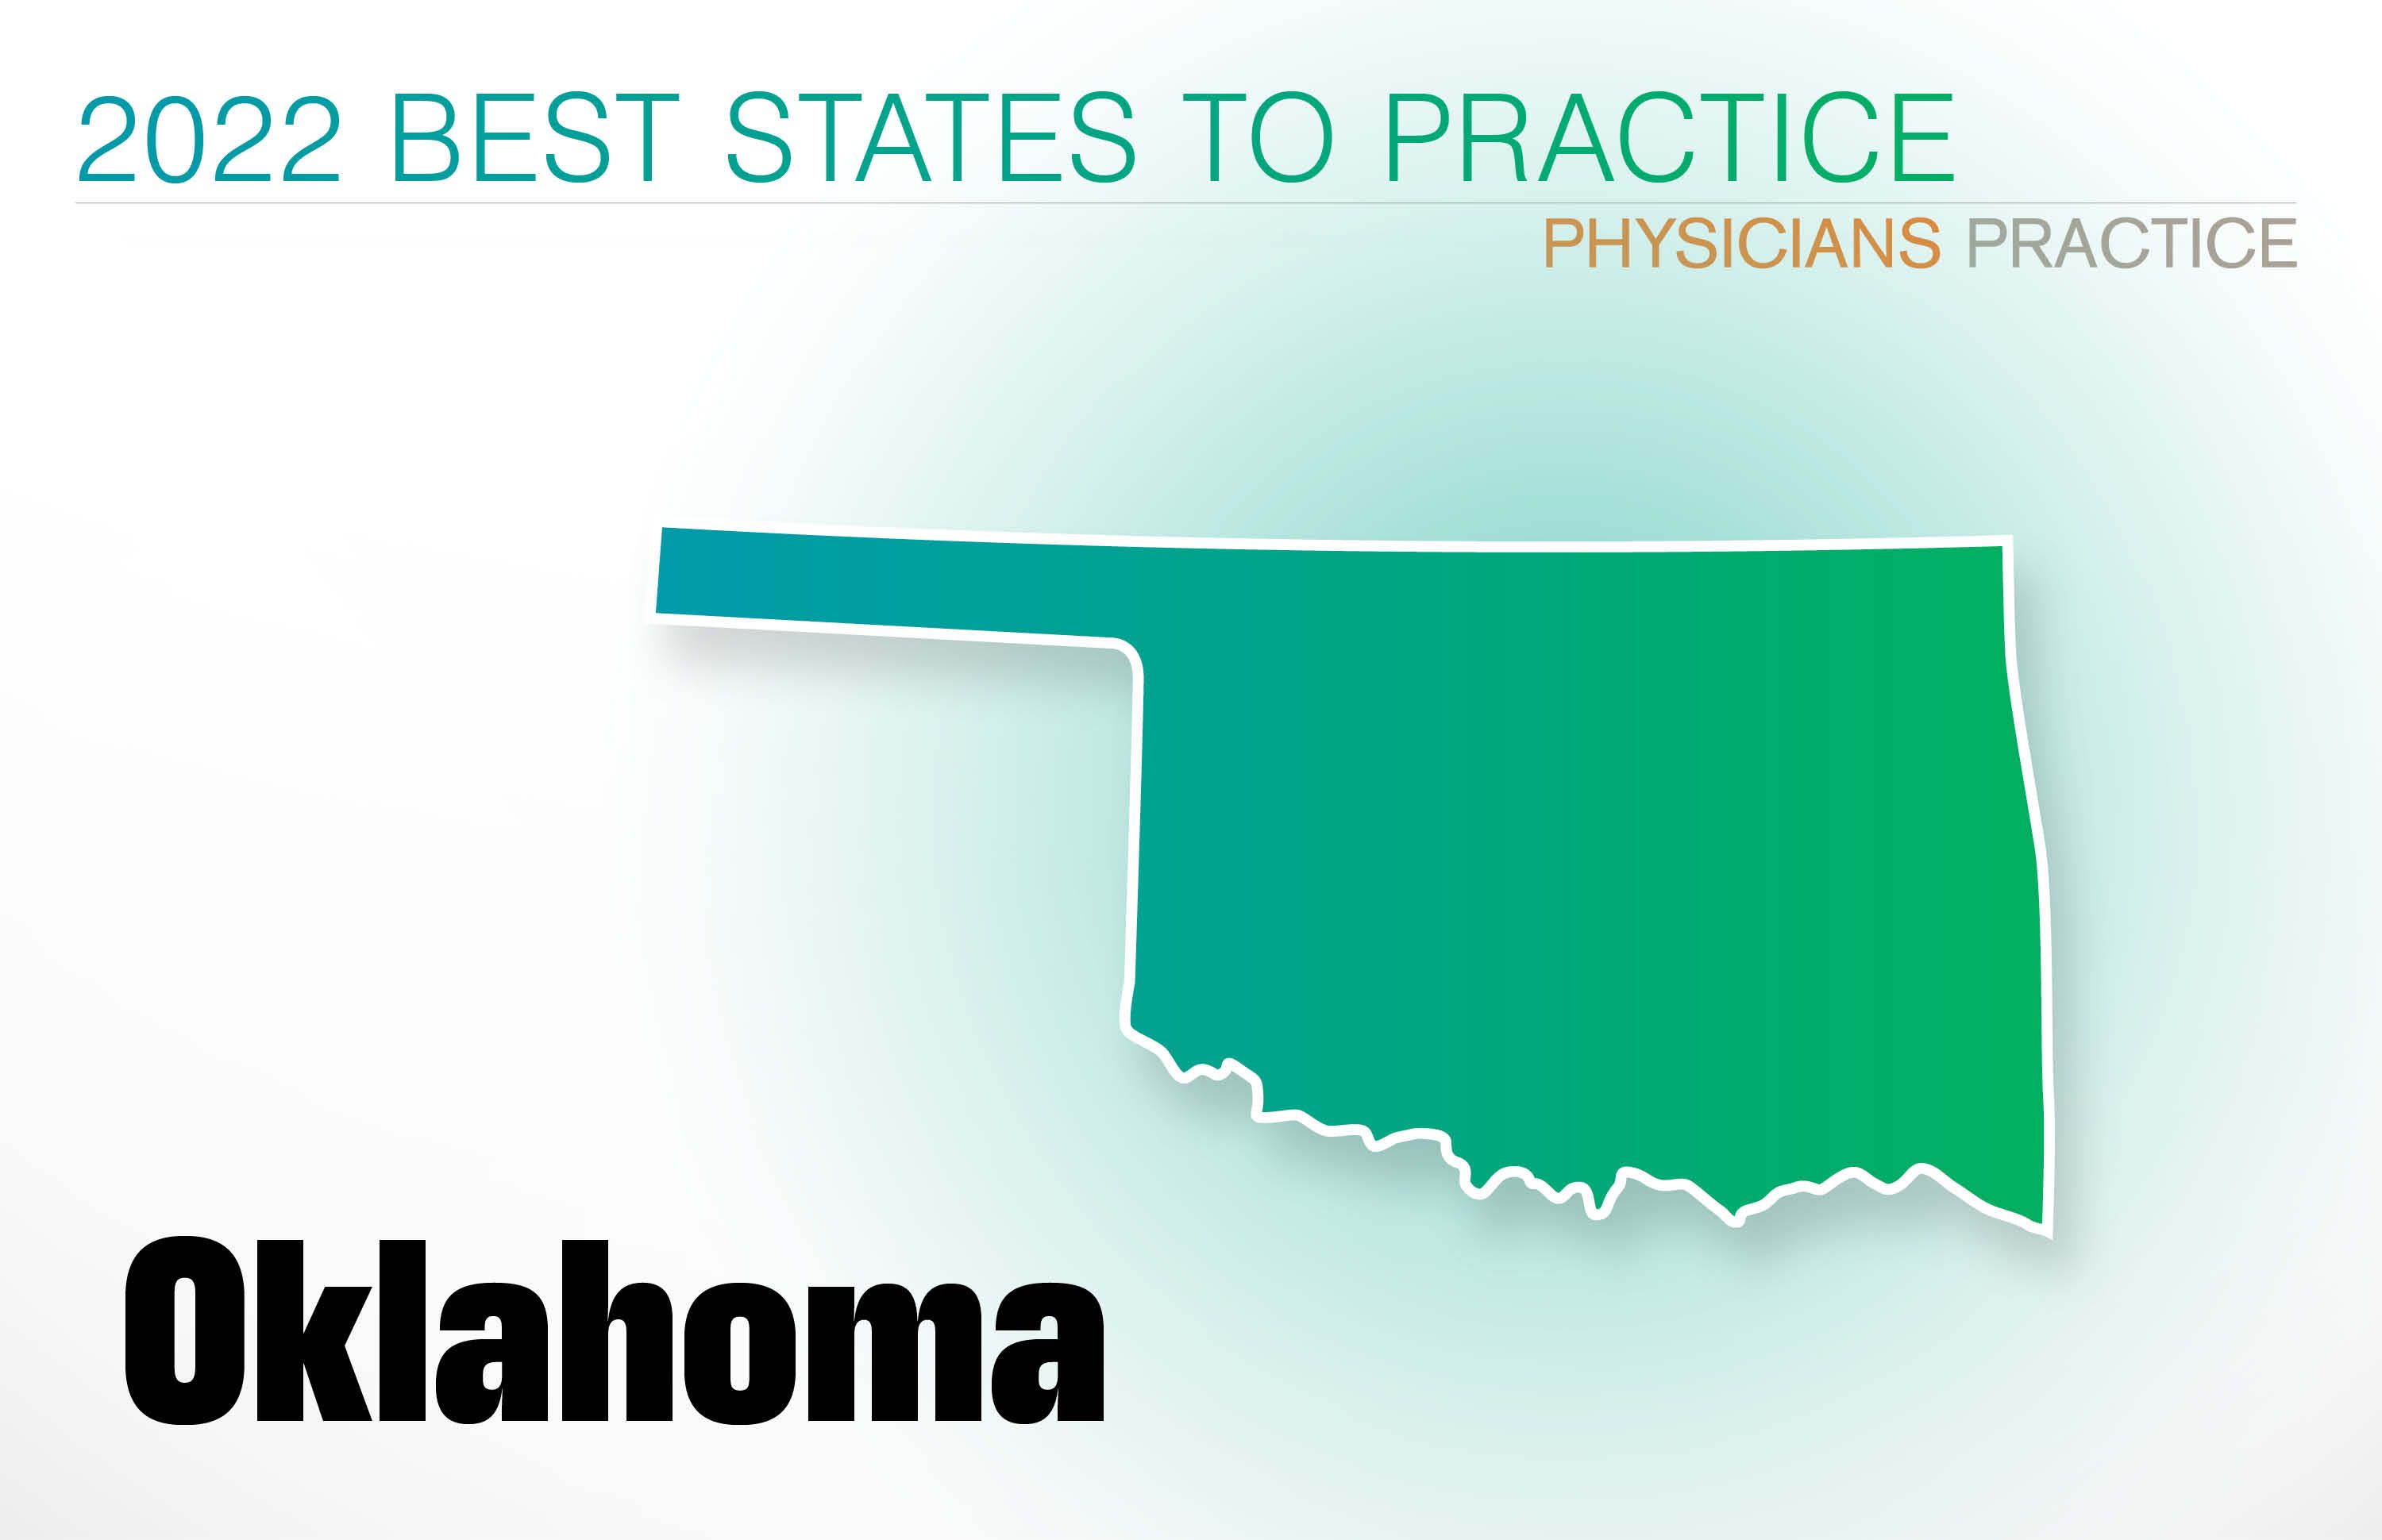 #17 Oklahoma Rankings: Cost of living: 2 Physician density: 3 Amount of state business taxes collected: 26 Average malpractice insurance rates: 26 Quality of life: 46 GPCI: 18